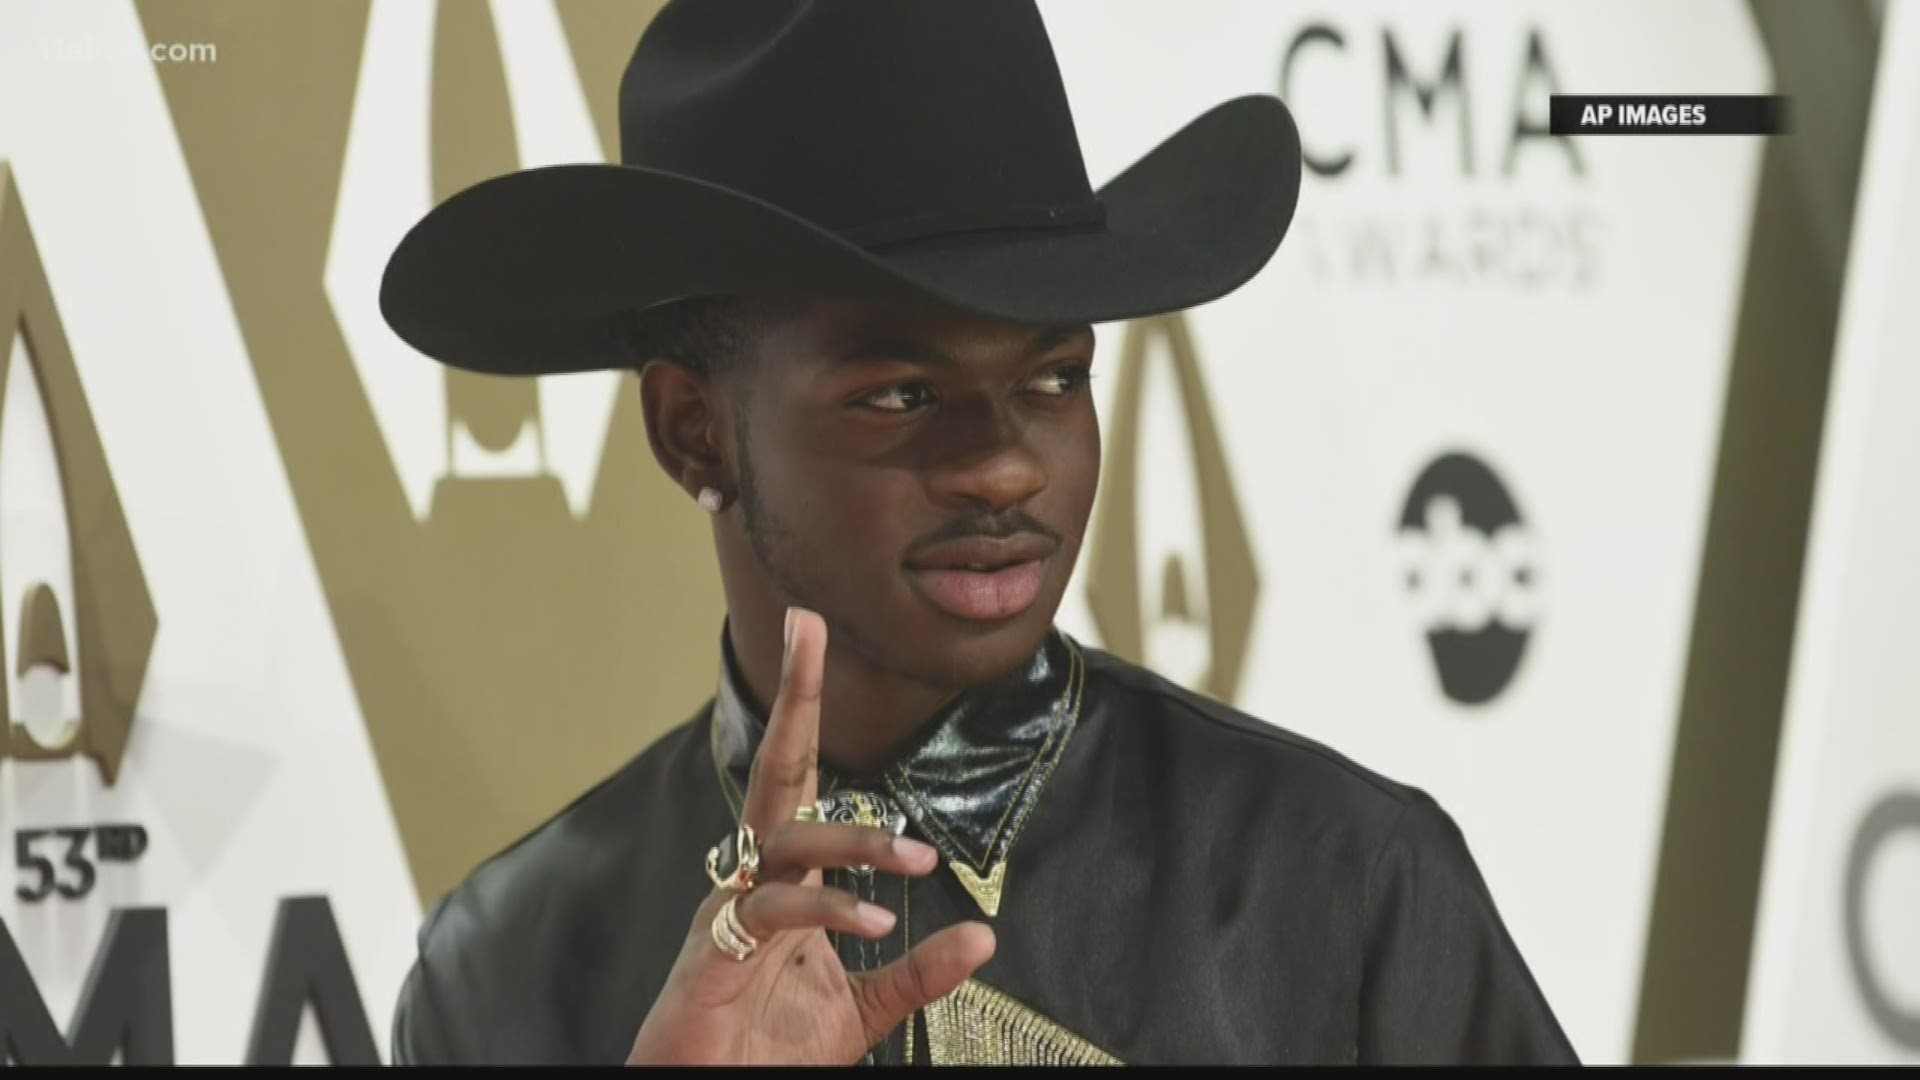 Leading the nominations for the state is Lil Nas X. The "Old Town Road" singer is up for Record Of The Year, Album Of The Year, and Best New Artist.